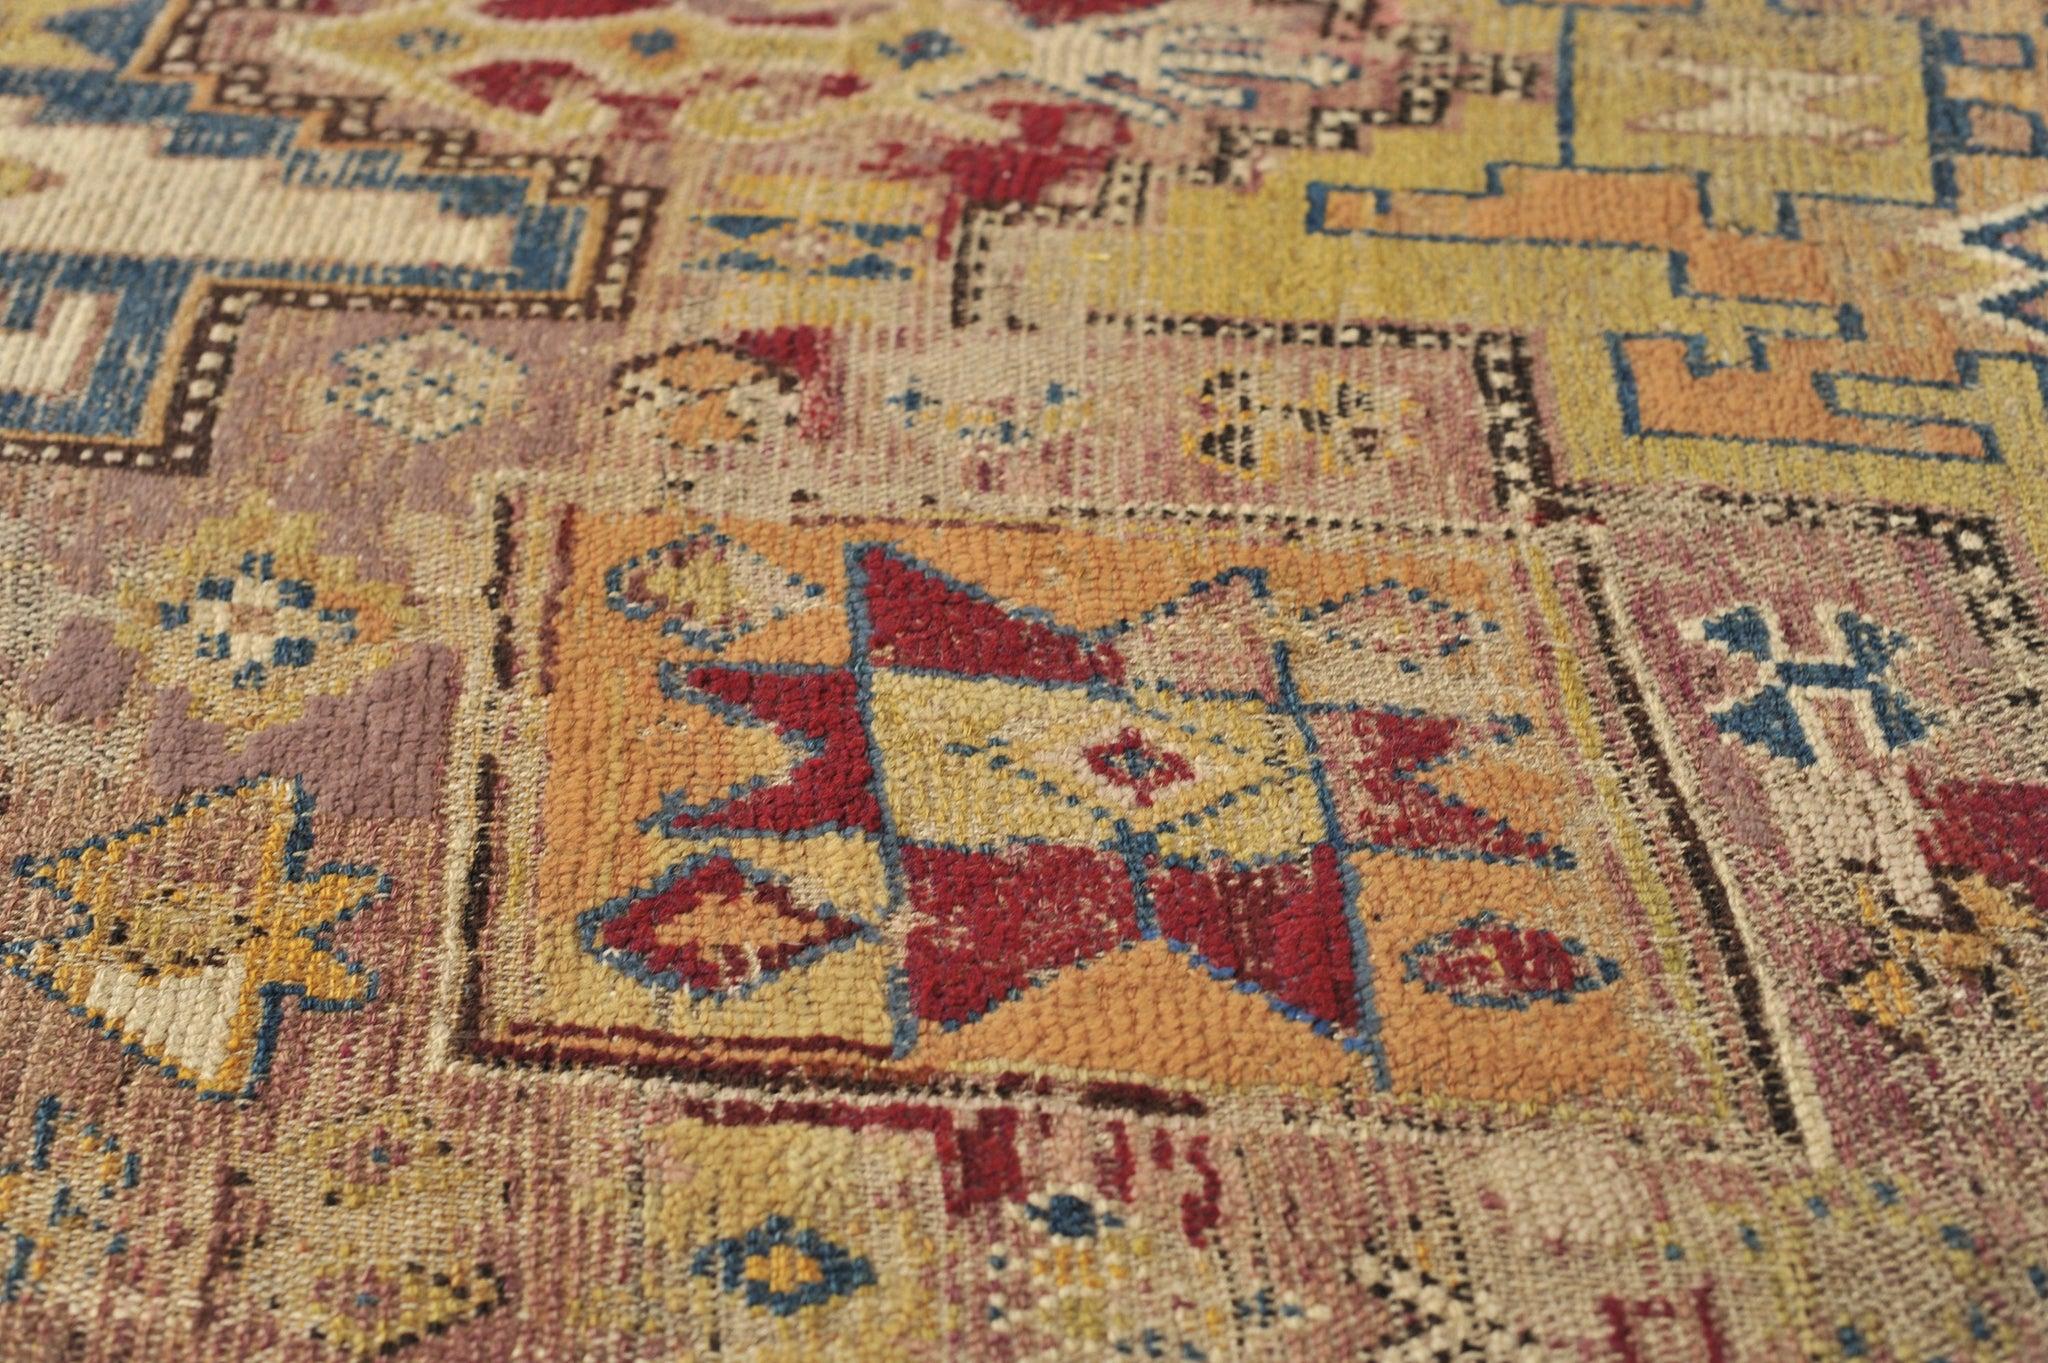 Antique Textile Rug with Lavender, Sunflower Yellows, & Blues, c. 1900 For Sale 4